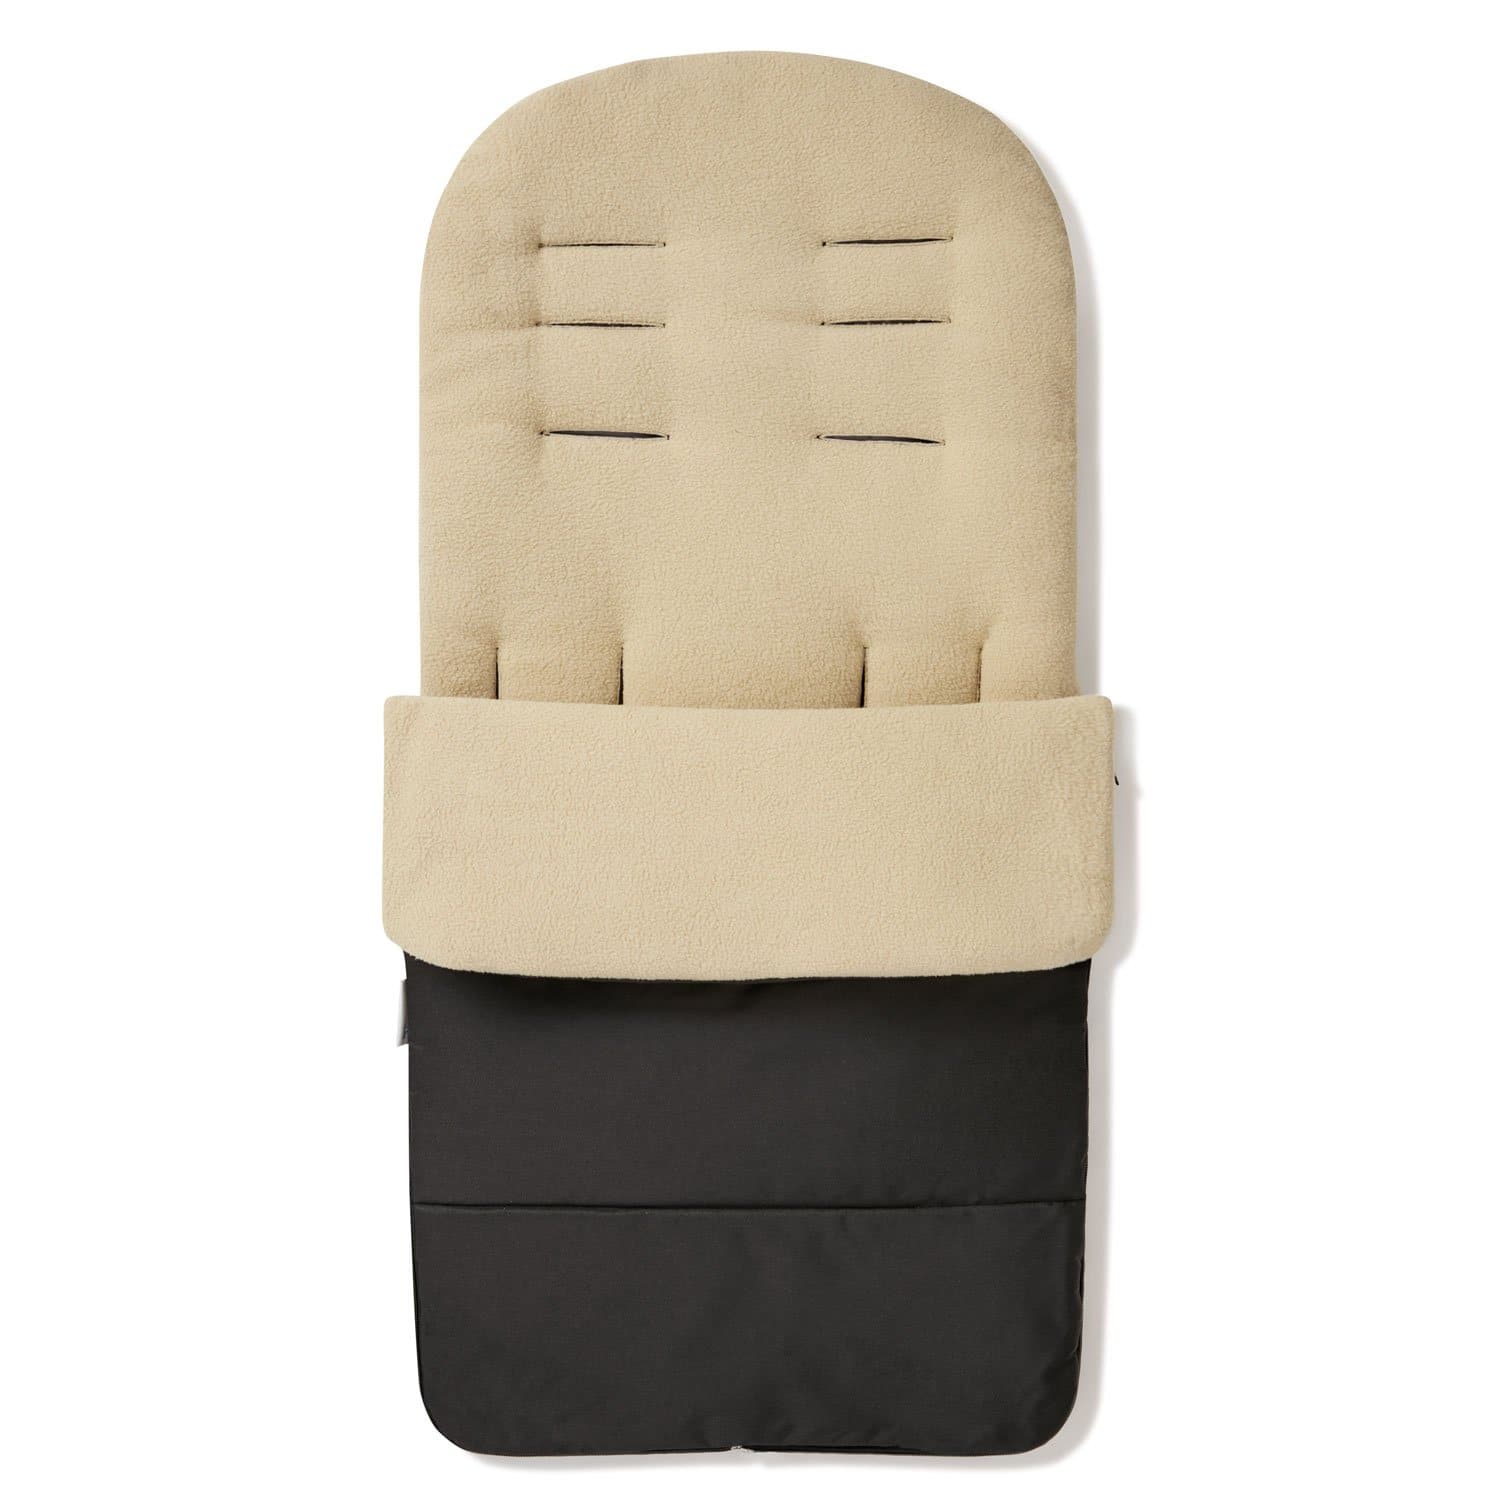 Premium Footmuff / Cosy Toes Compatible with Safety 1st - Desert Sand / Fits All Models | For Your Little One